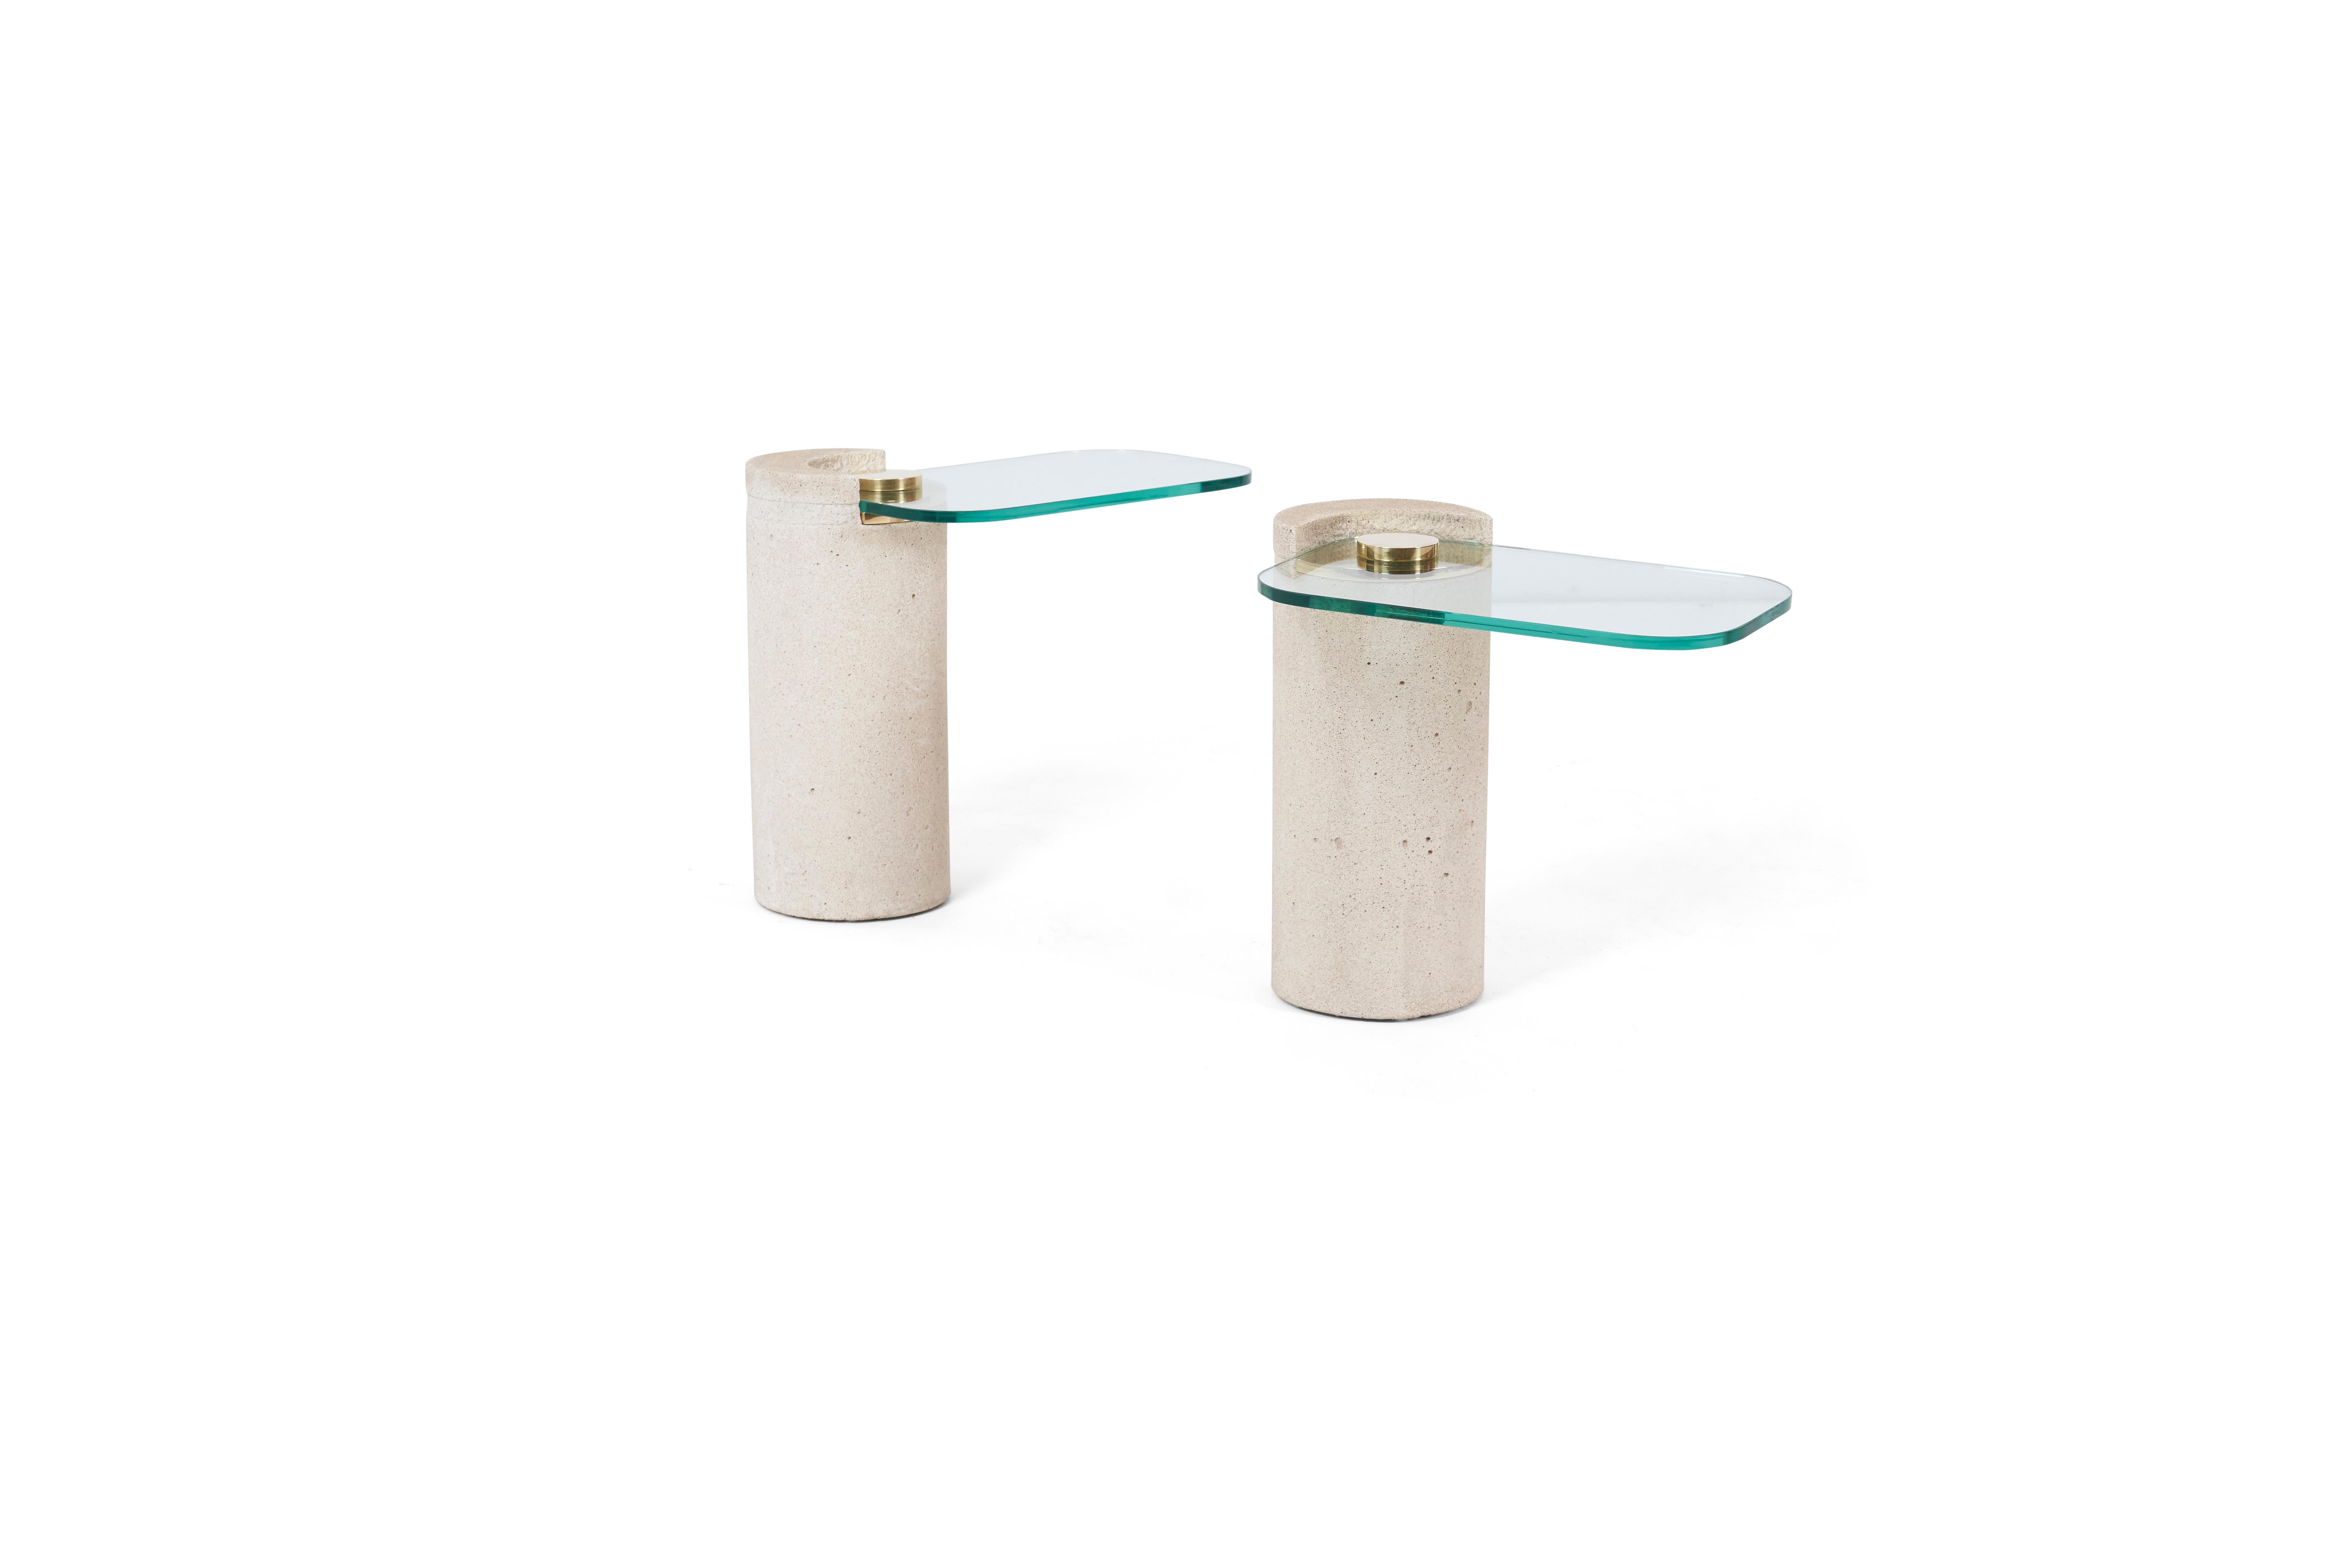 Pair of sandstone drink tables with polished brass hardware and cantilevered glass. Karl Springer, 1980's. New glass

4 tables available. Sold in sets of 2.